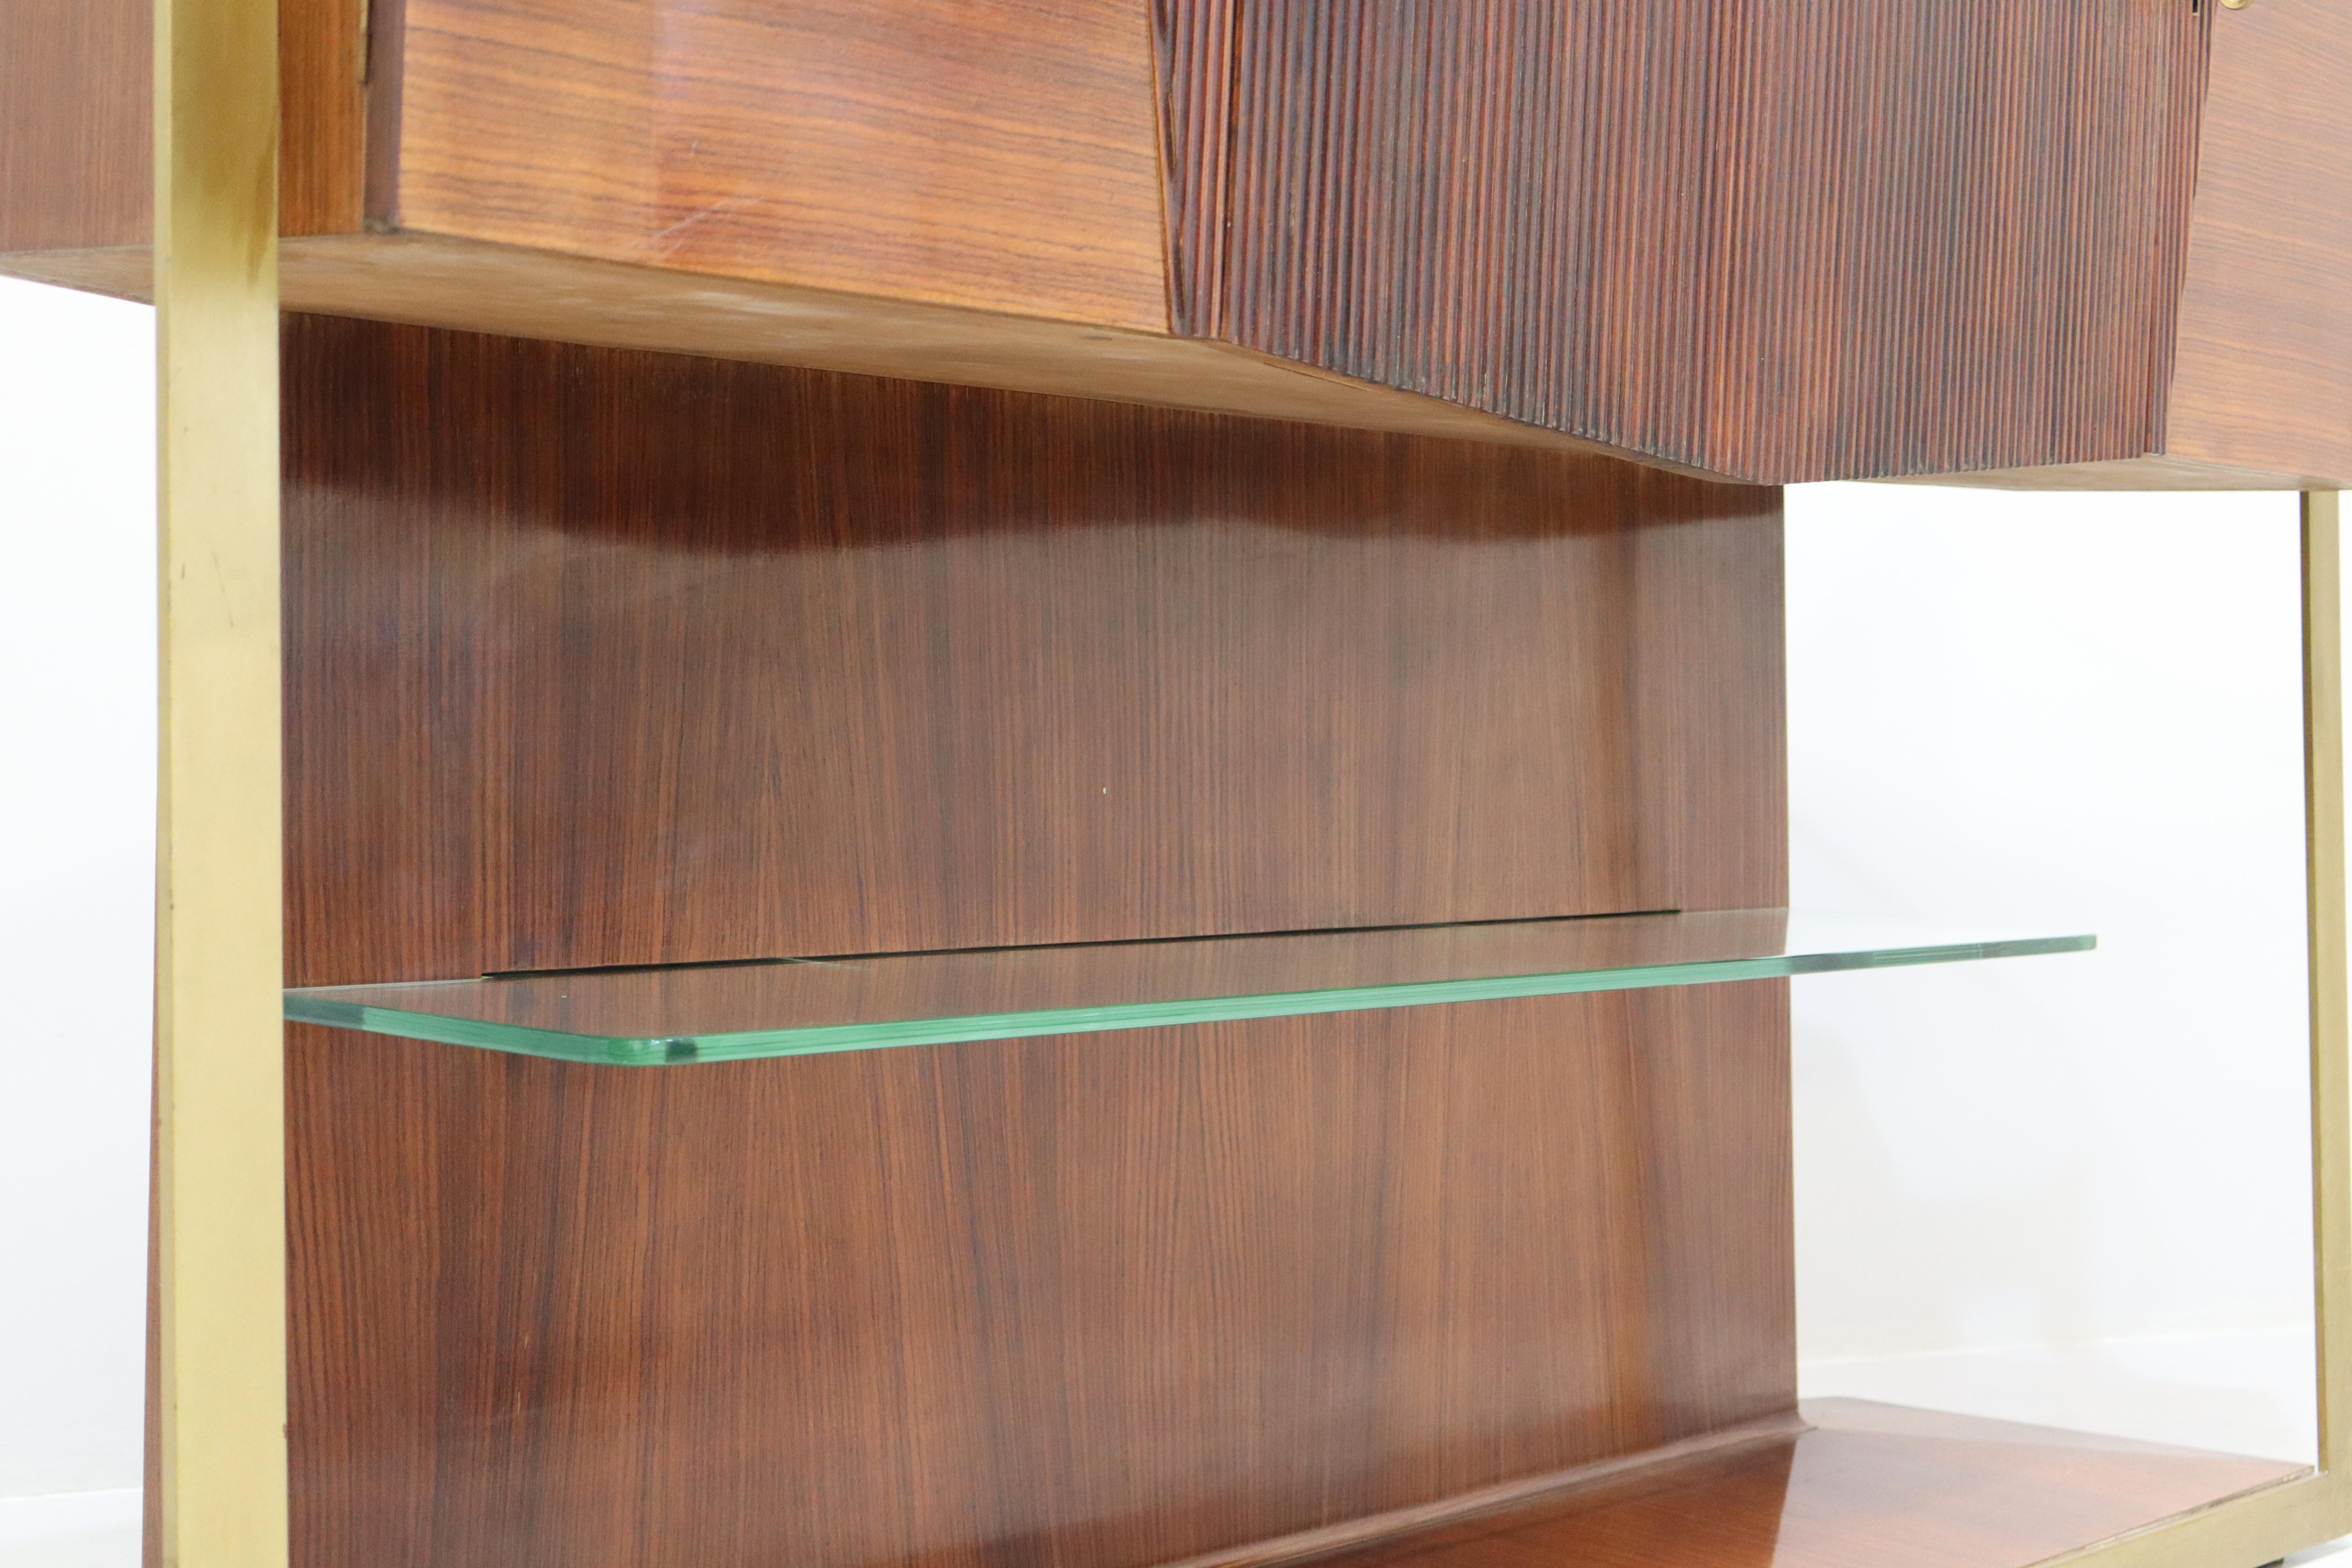 Italian Midcentury Rosewood Sideboard or Bar Cabinet by Vittorio Dassi, 1950s For Sale 2